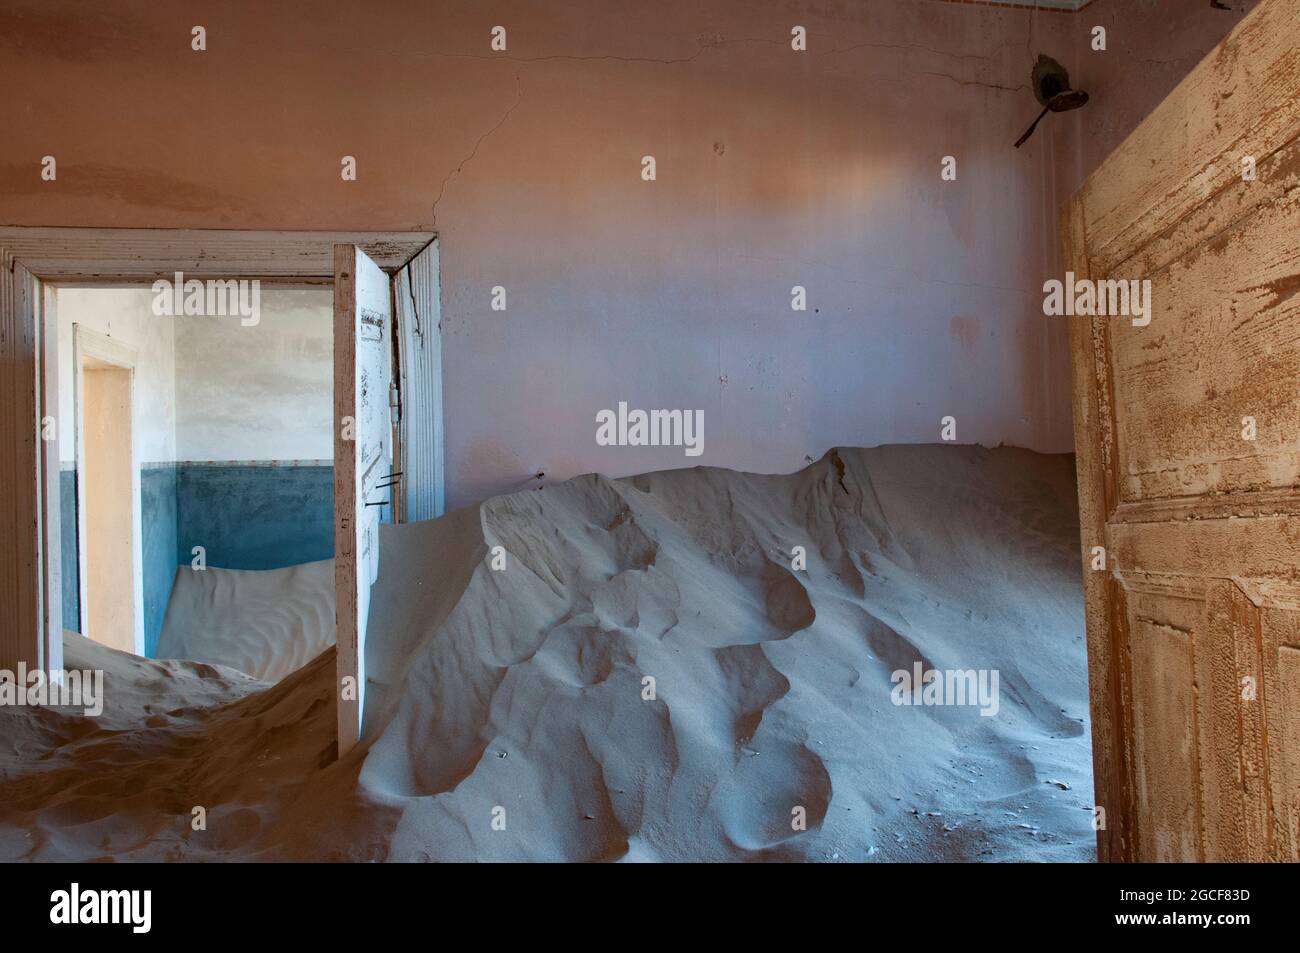 Interior room in Kolmanskop, a ghost mining town in Namibia, Africa. The desert has reclaimed the town after it was abandoned. Stock Photo